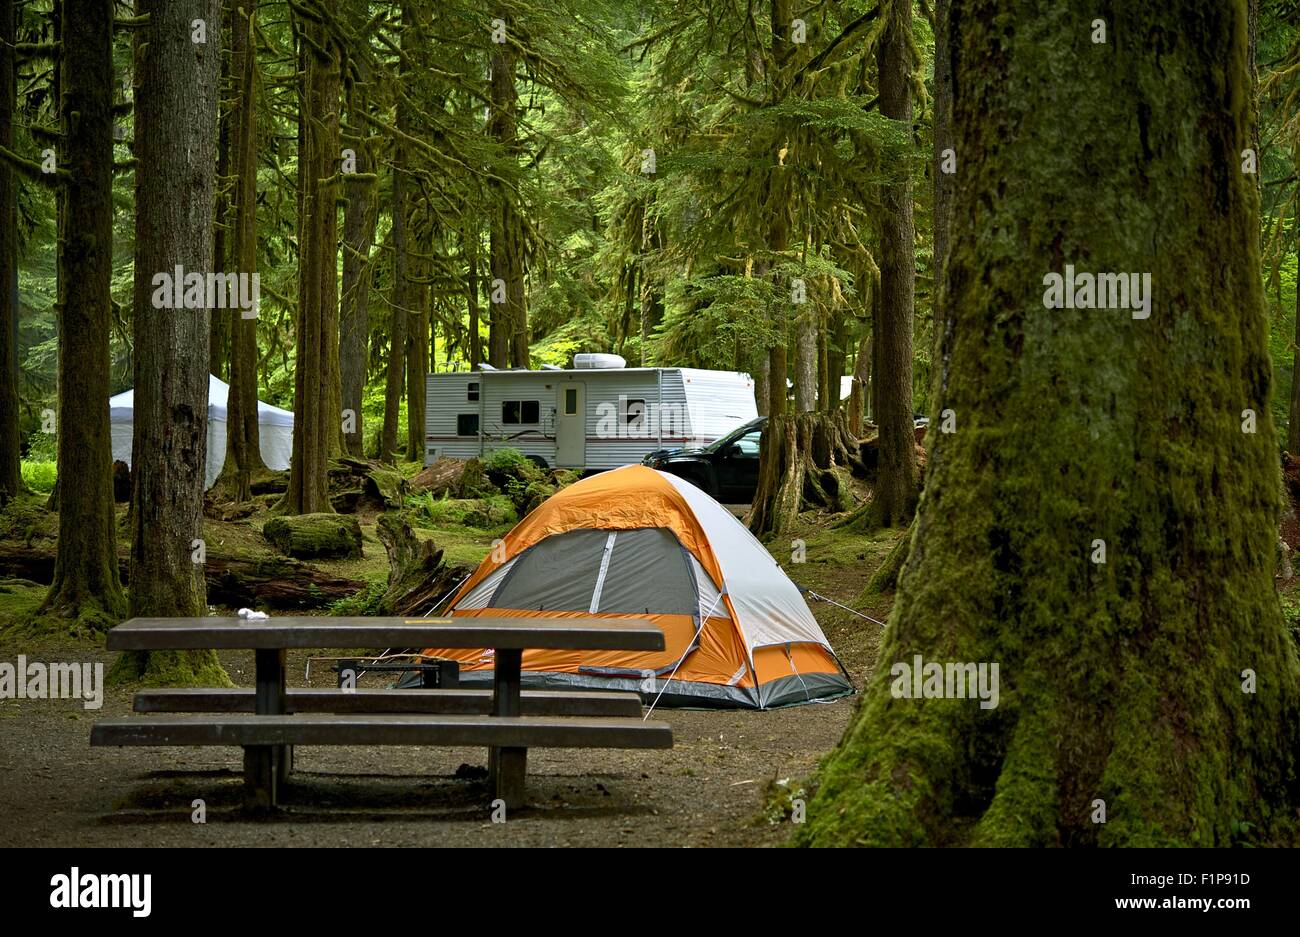 The Campground - Small Orange Tent and Travel Trailer in the Background. Deep Forest Campground. Outdoor Lifestyle Photo Collect Stock Photo